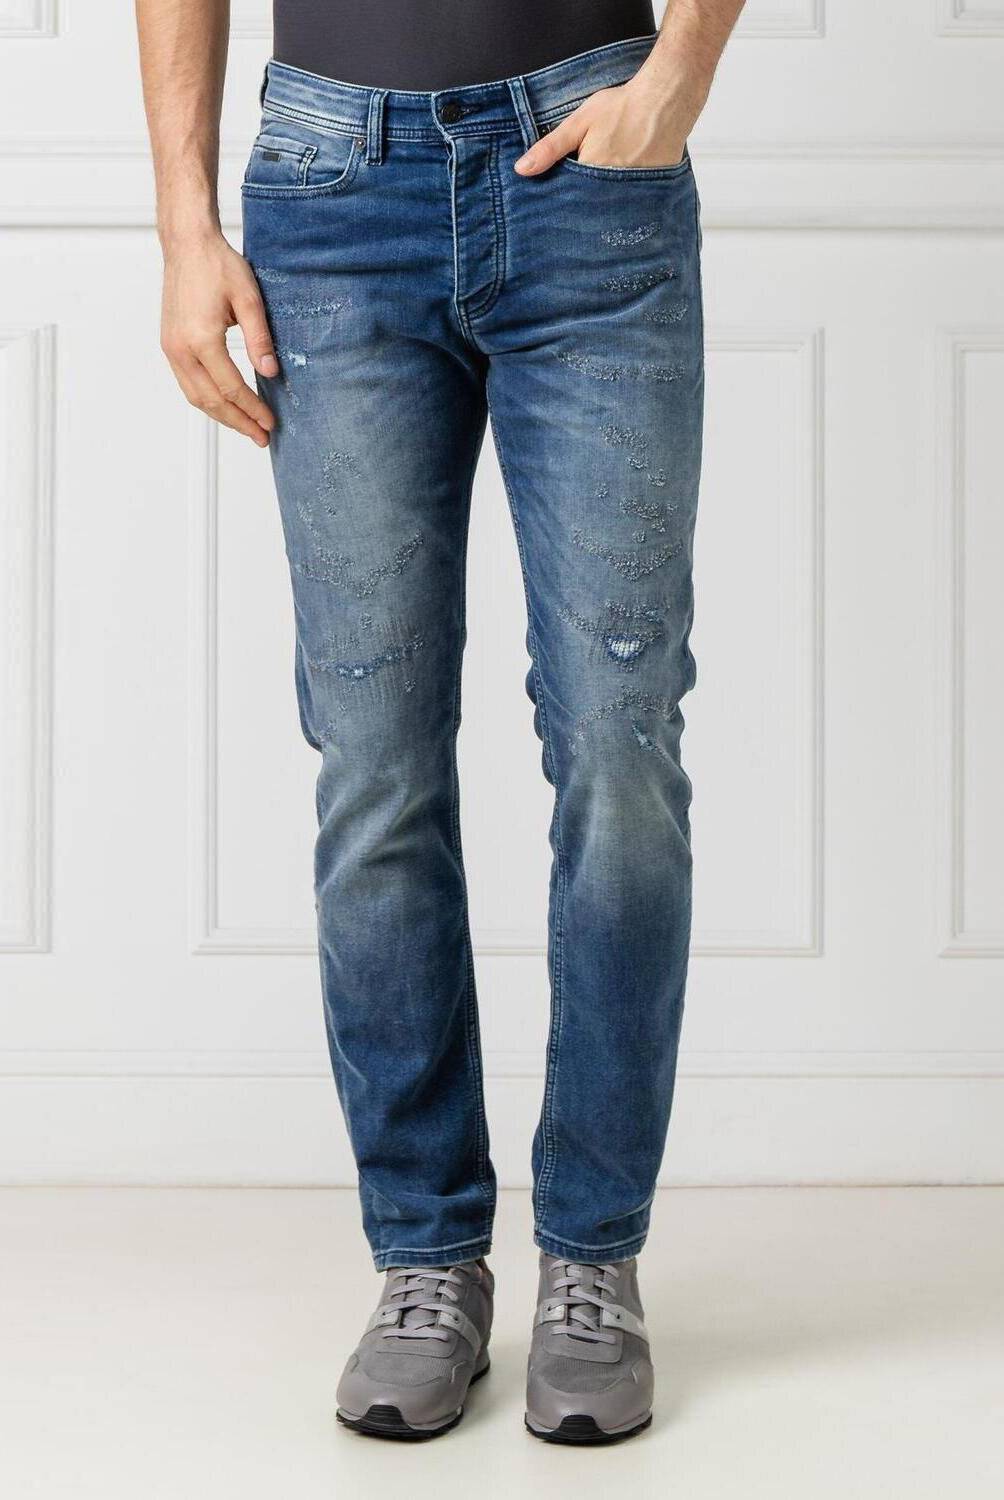 HUGO BOSS - Jeans Straight Fit Hombre